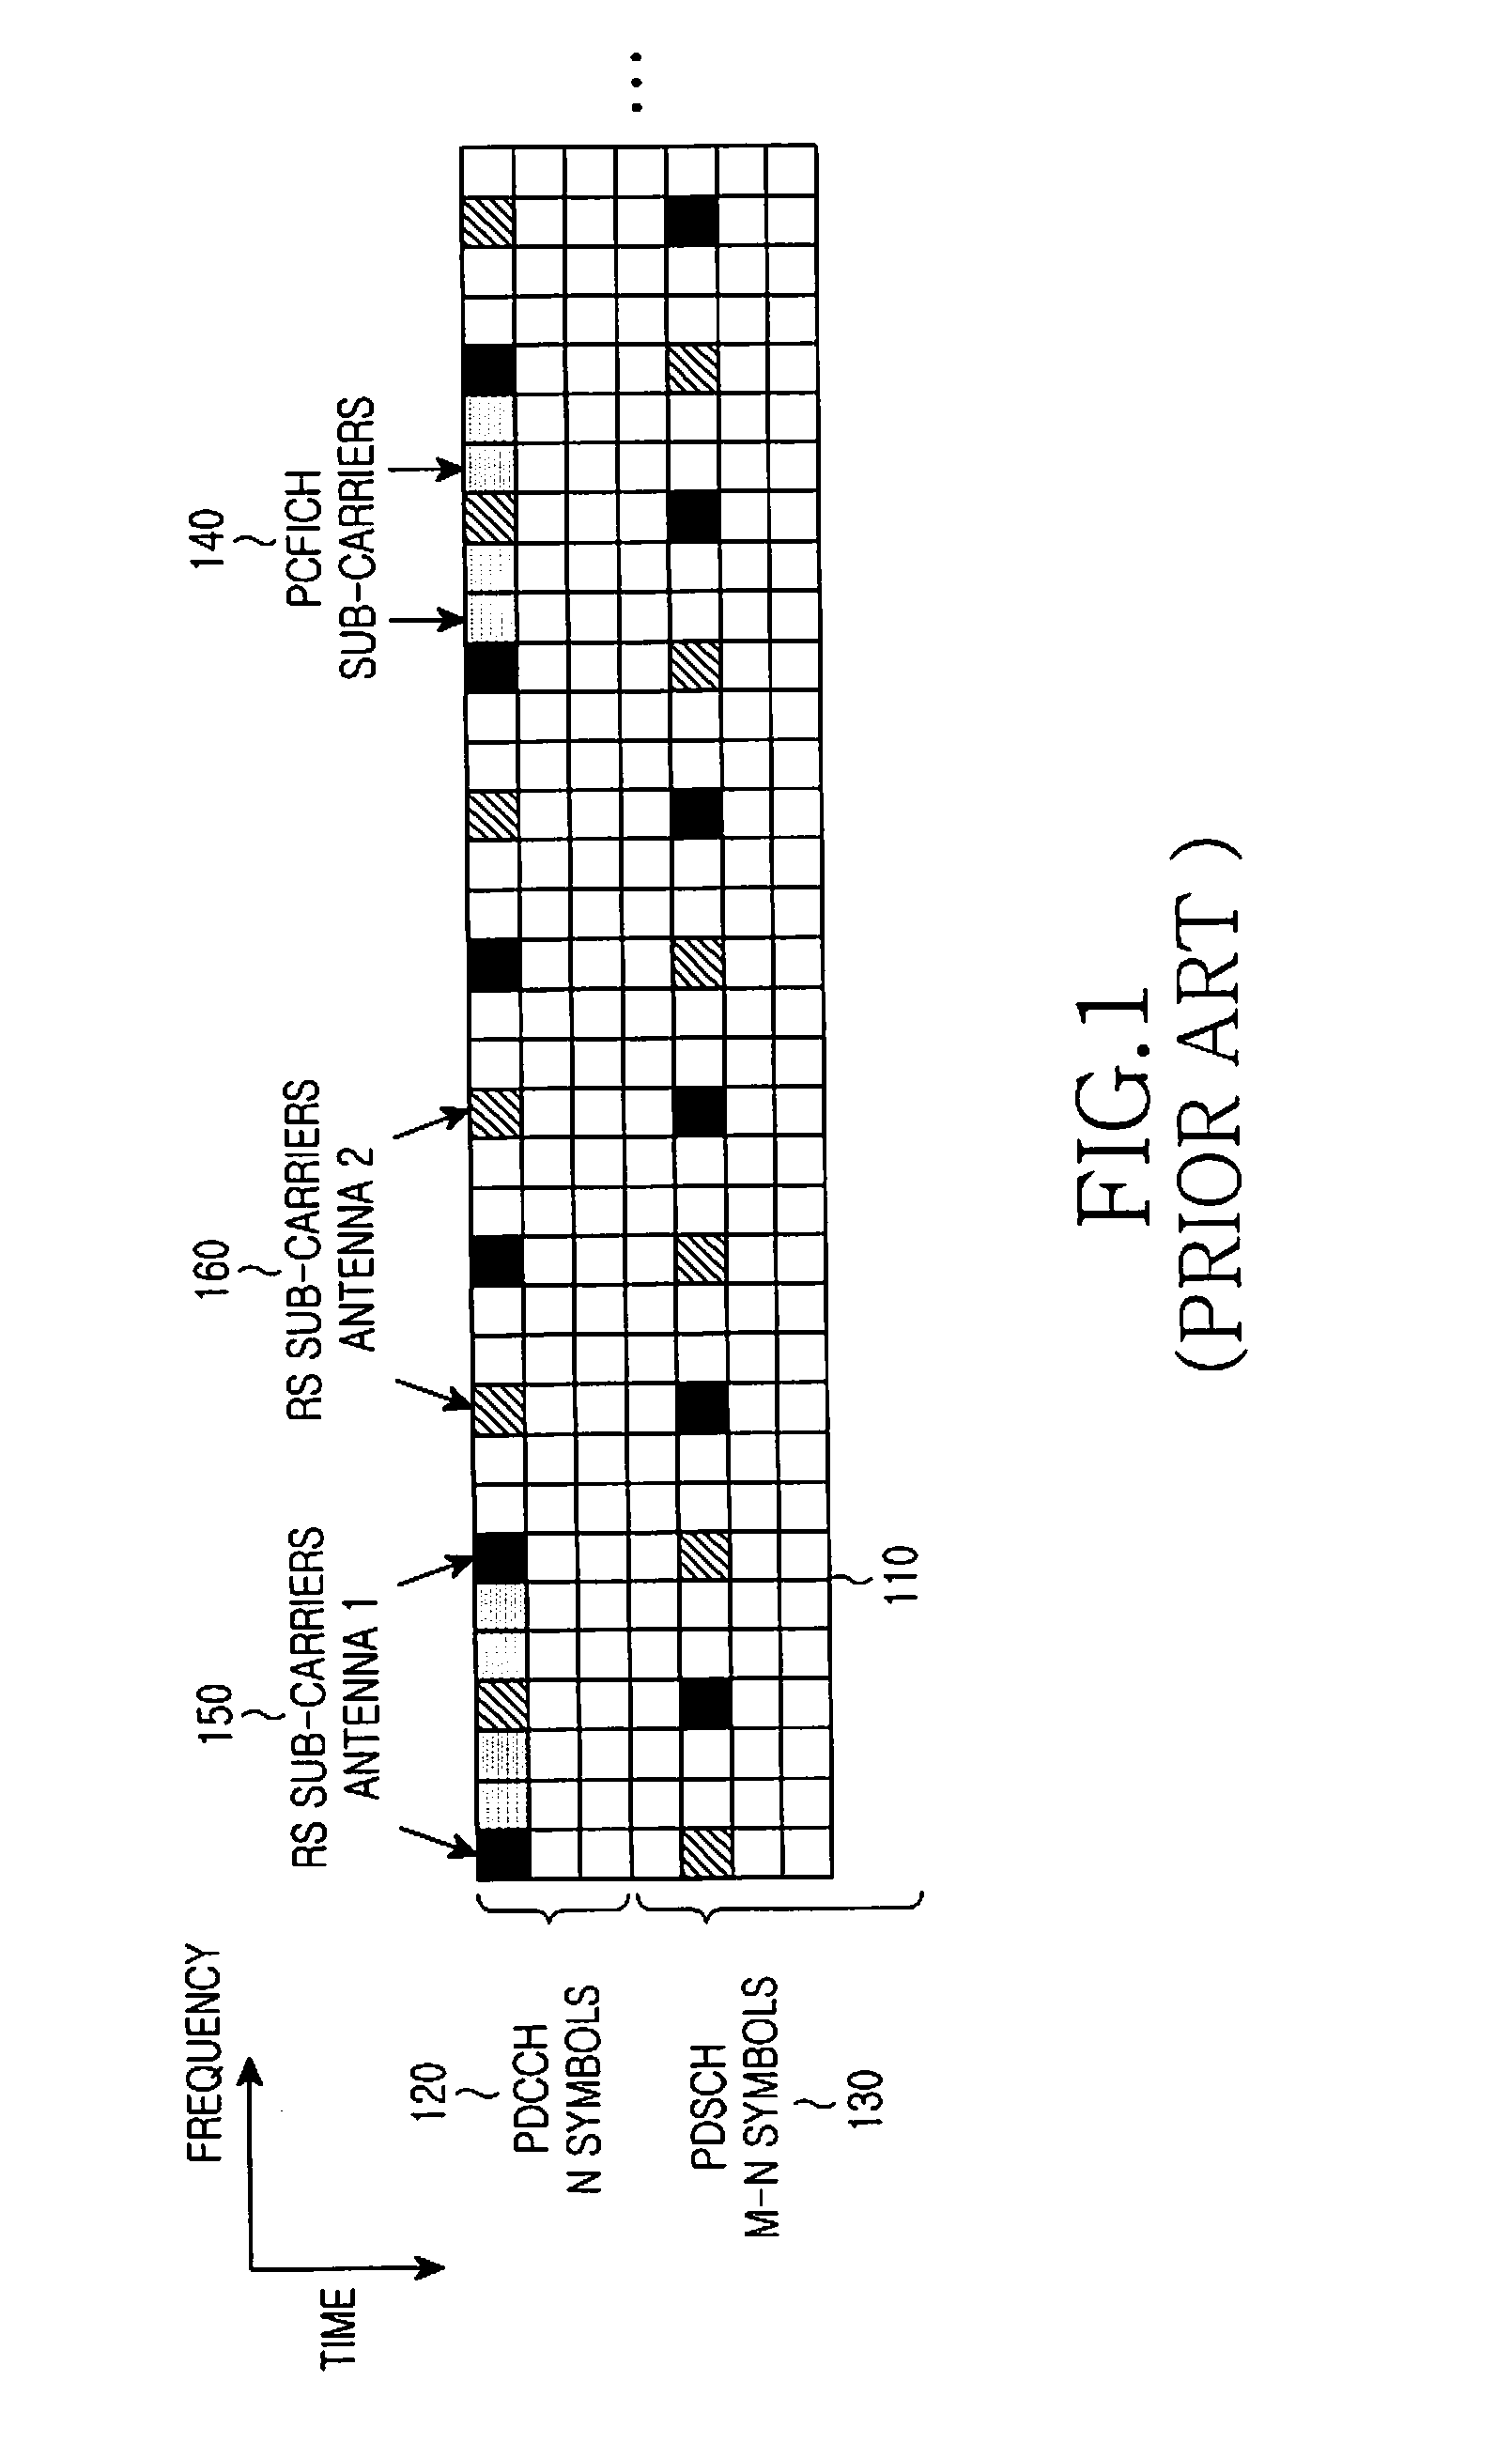 Extending physical downlink control channels